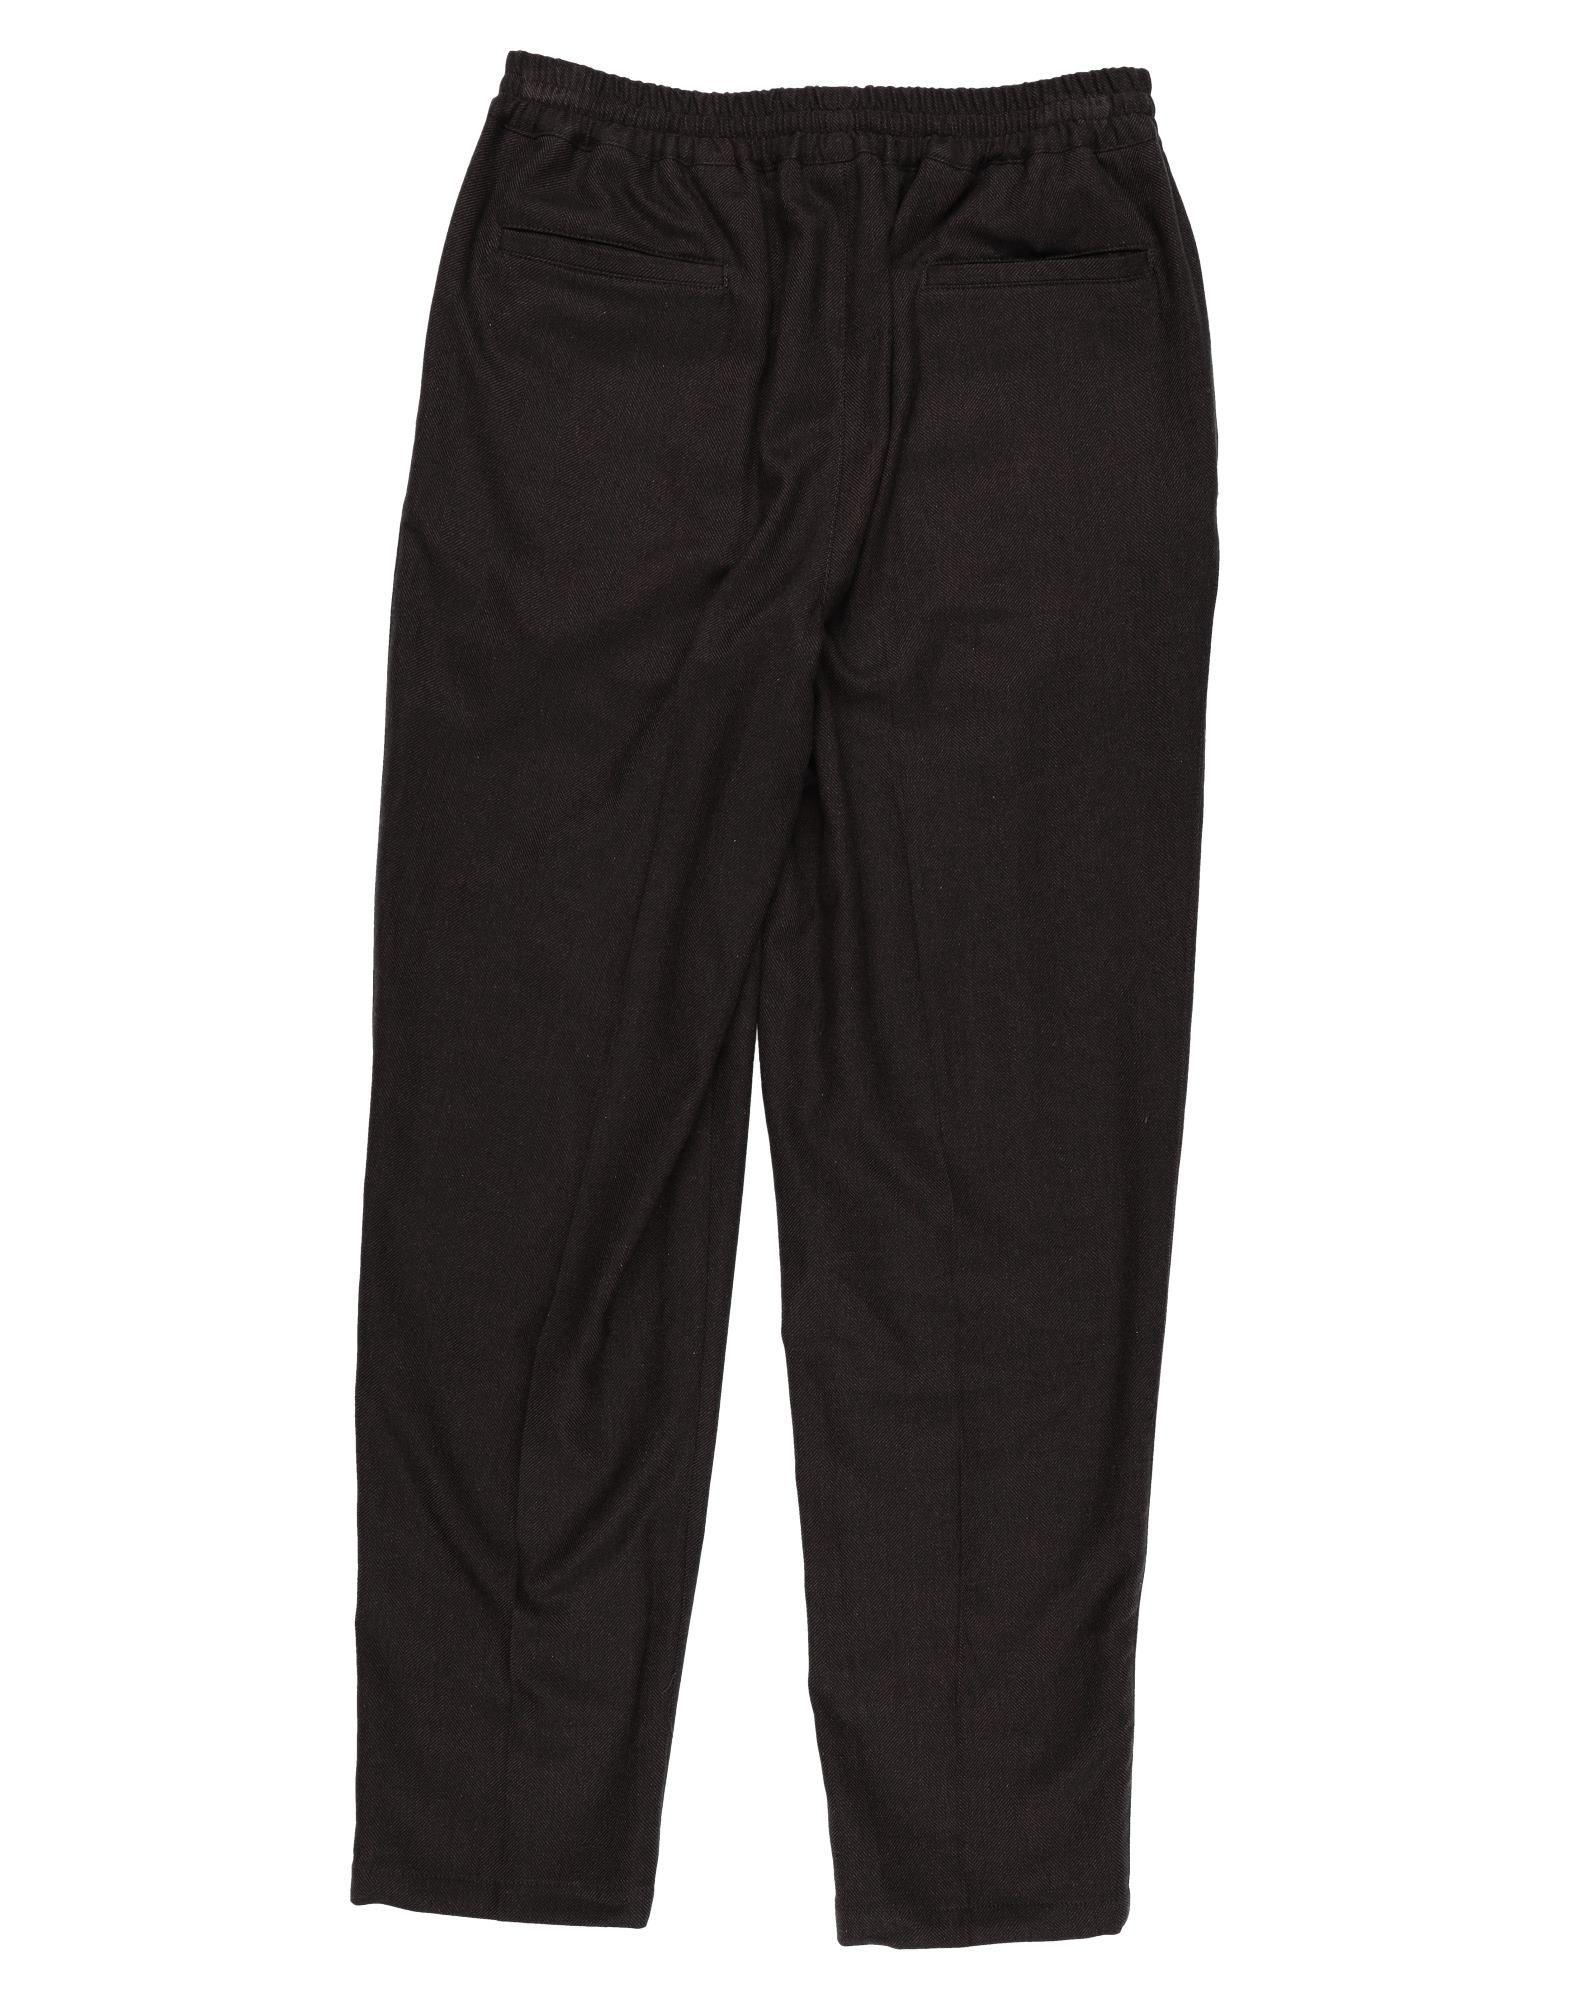 The Gigi Flannel Casual Pants in Dark Brown (Brown) for Men - Lyst